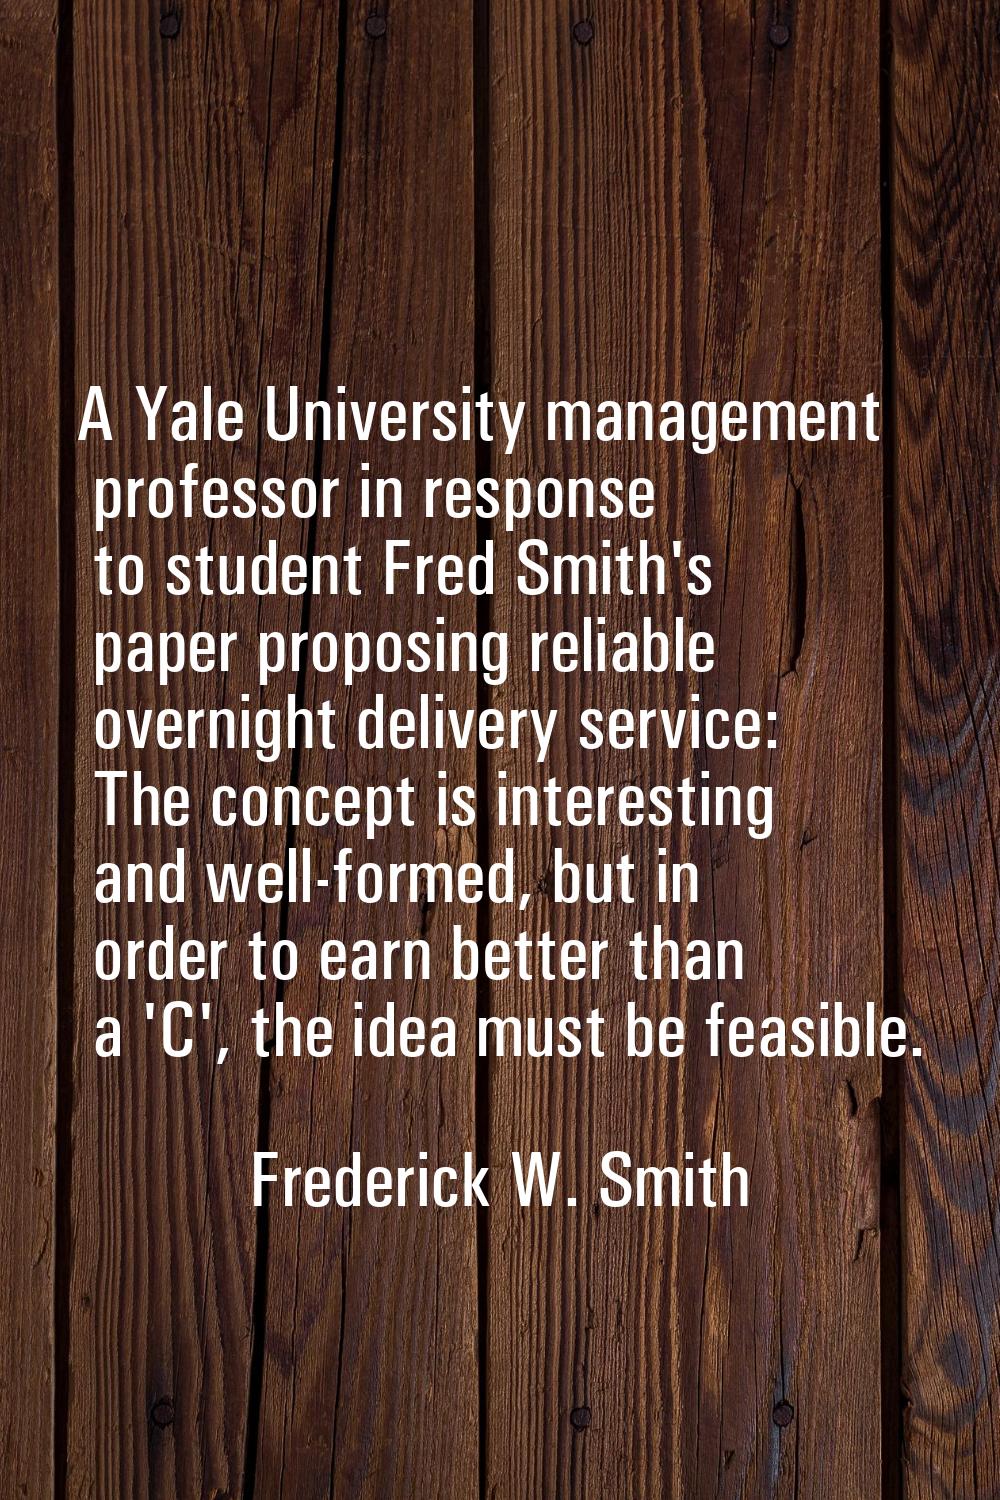 A Yale University management professor in response to student Fred Smith's paper proposing reliable